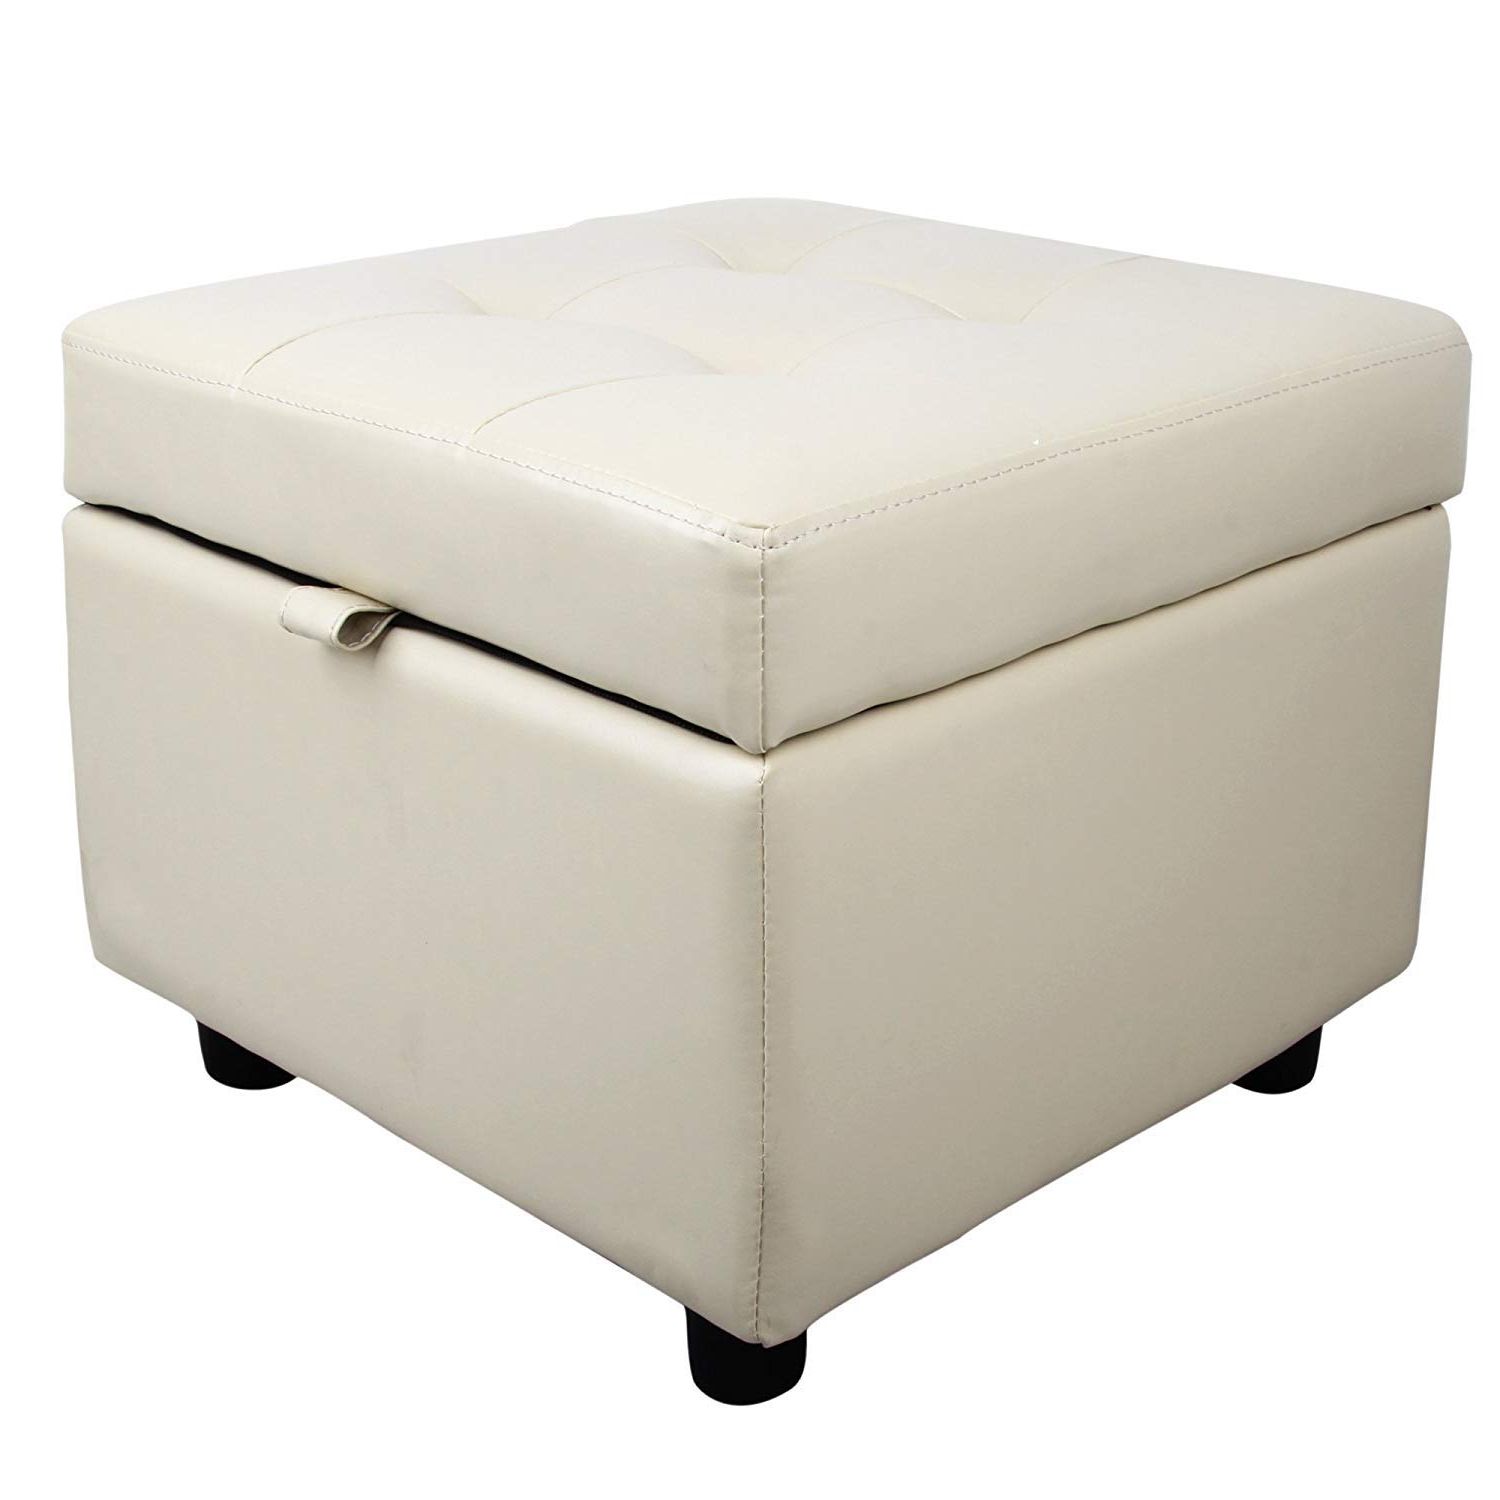 Best Small Storage Ottoman Cube Ivory – Your House With Well Known White And Blush Fabric Square Ottomans (View 2 of 10)